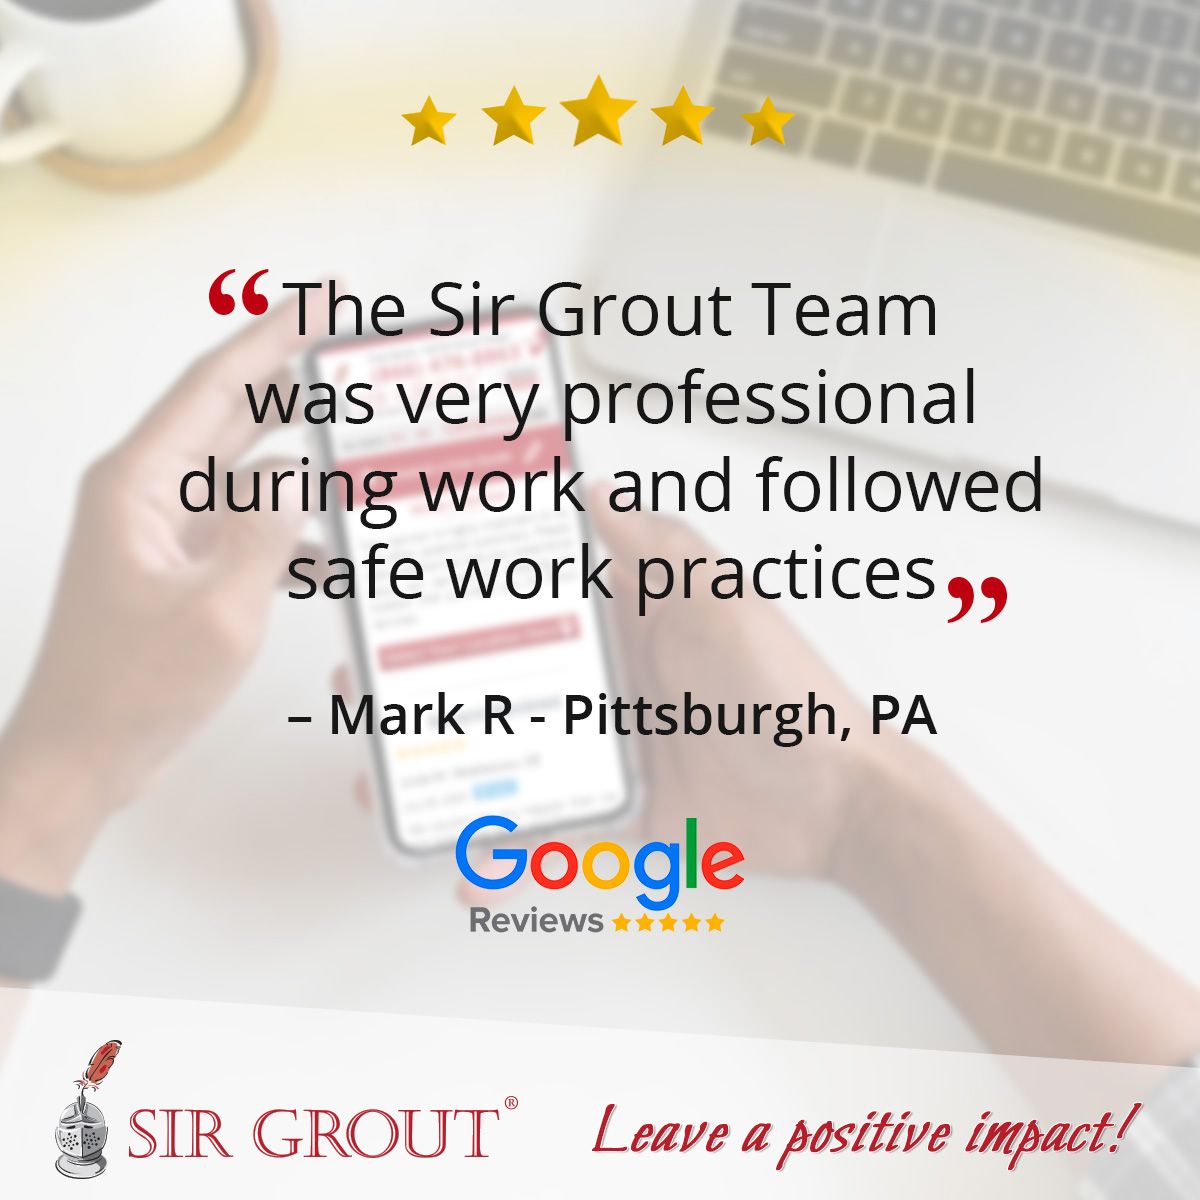 The Sir Grout Team was very professional during work and followed safe work practices